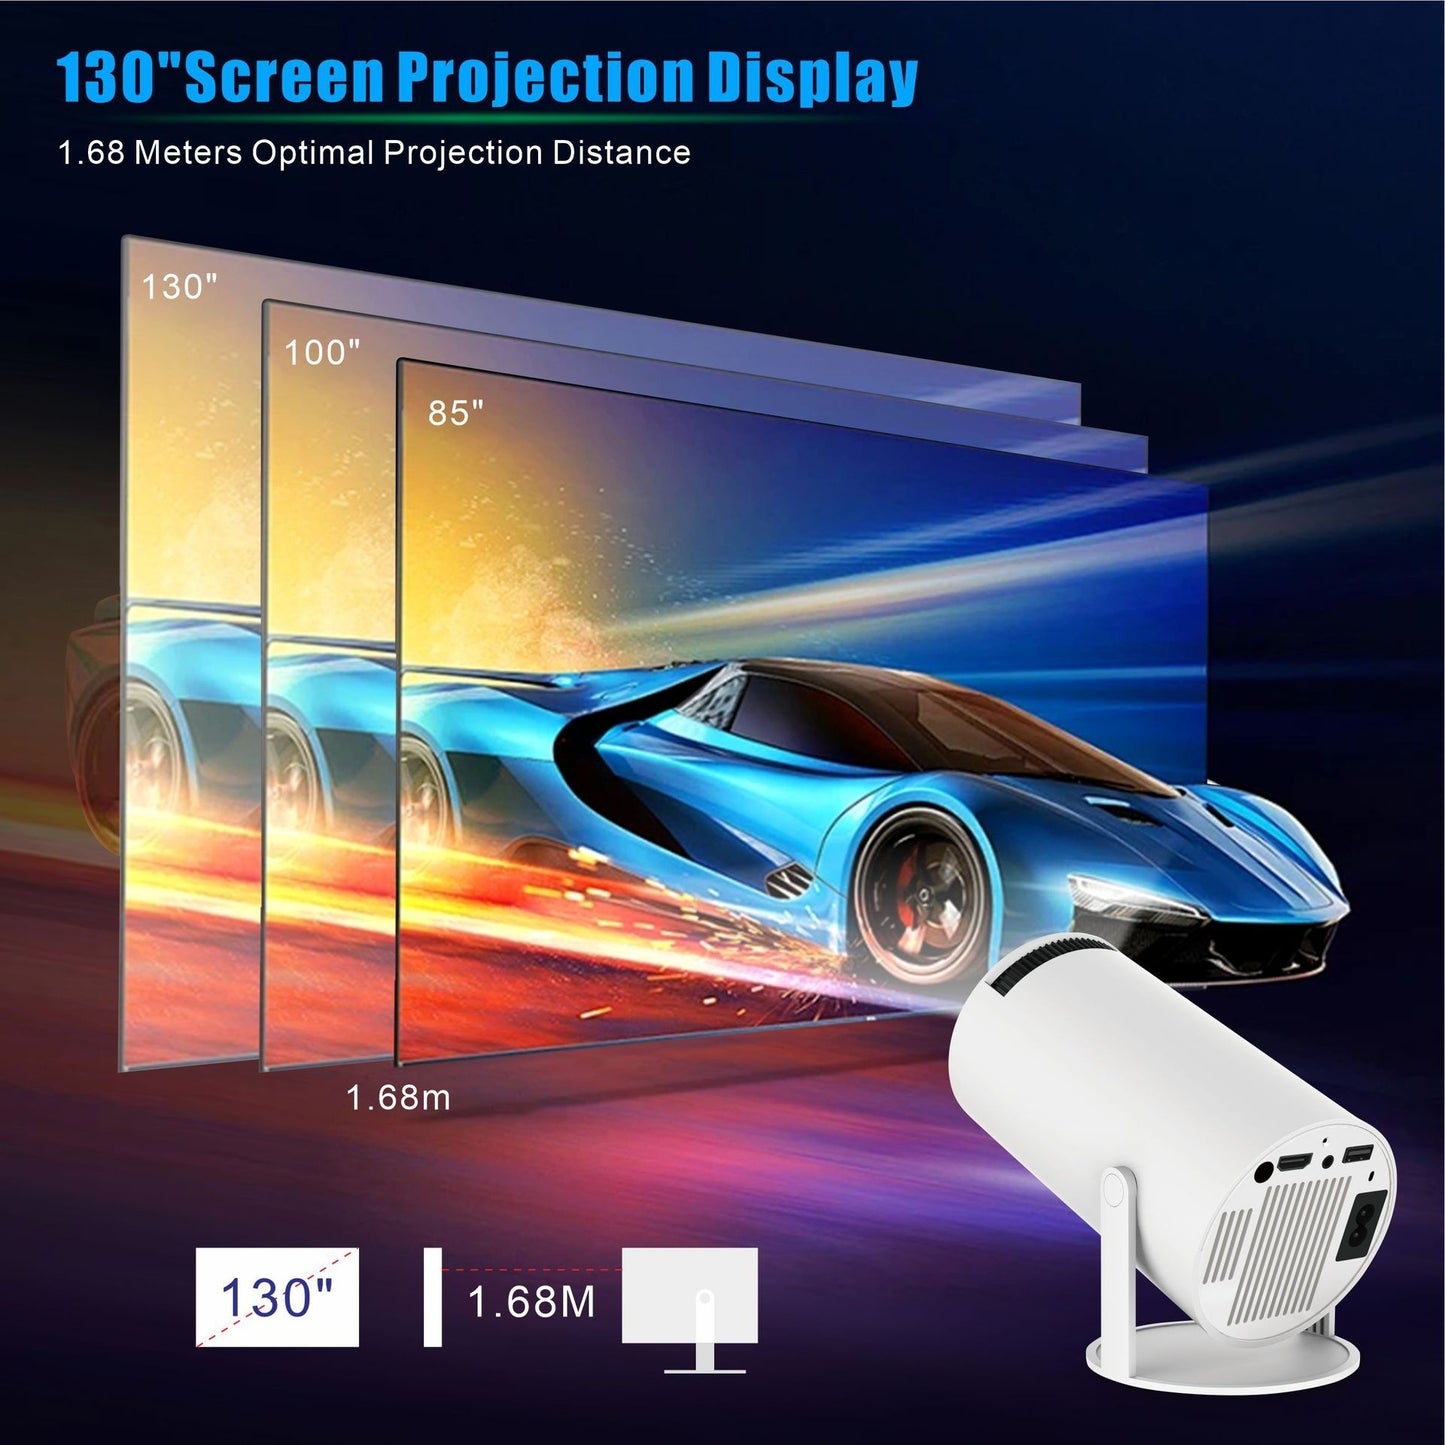 HY300 Pro Projector: Home Theater Entertainment Portable Small Projector